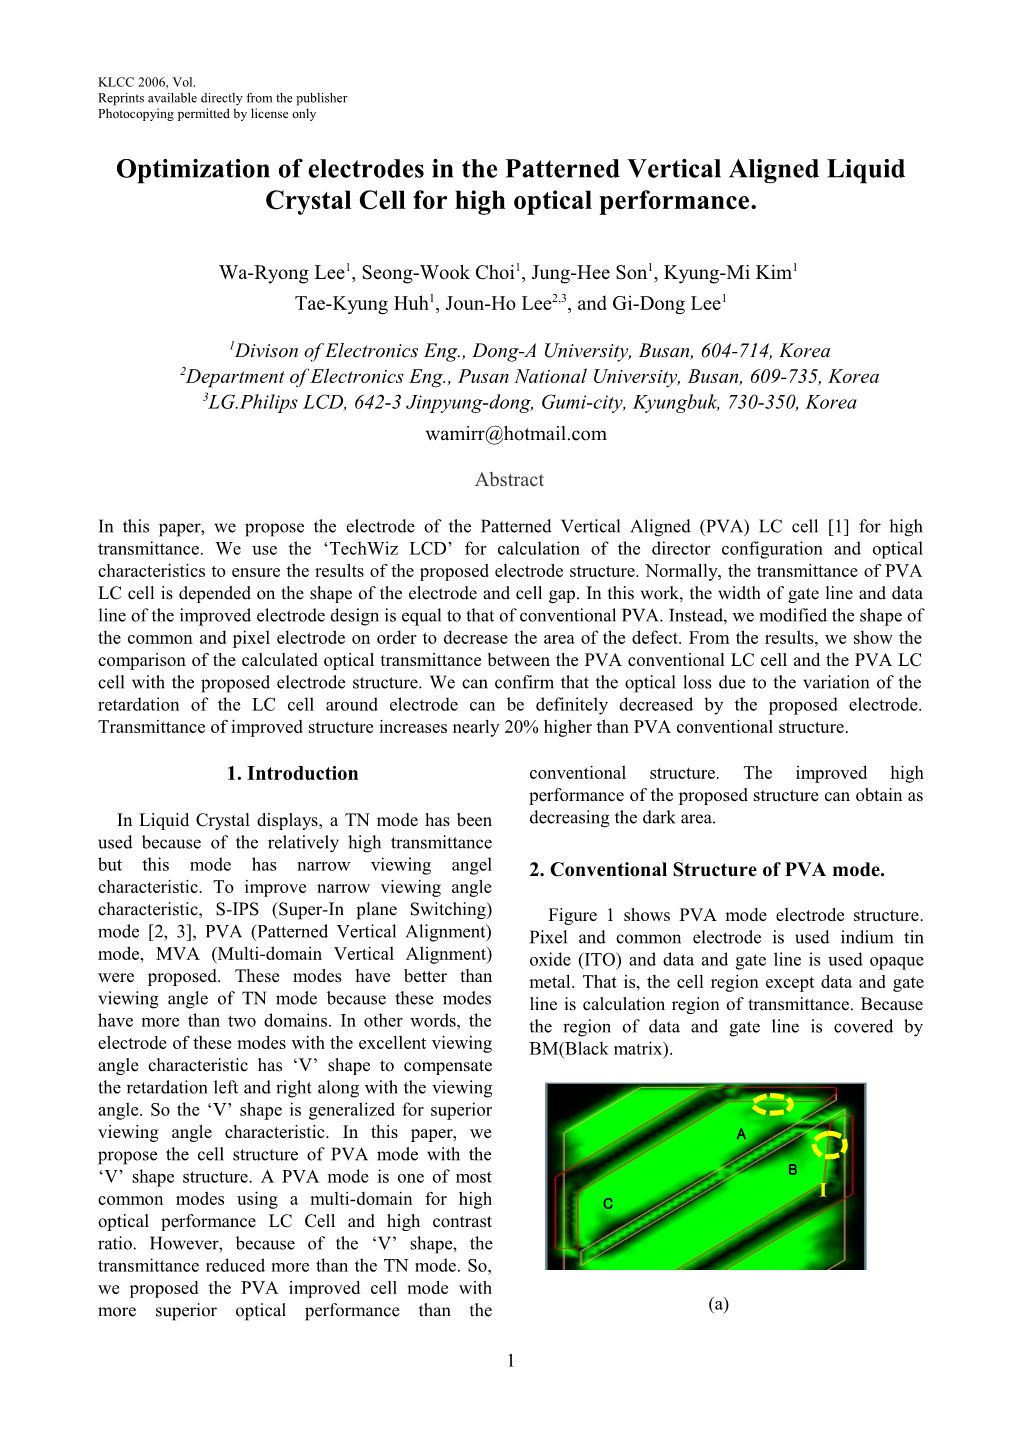 Optimization of Electrodes in the Patterned Vertical Aligned Liquid Crystal Cell for High